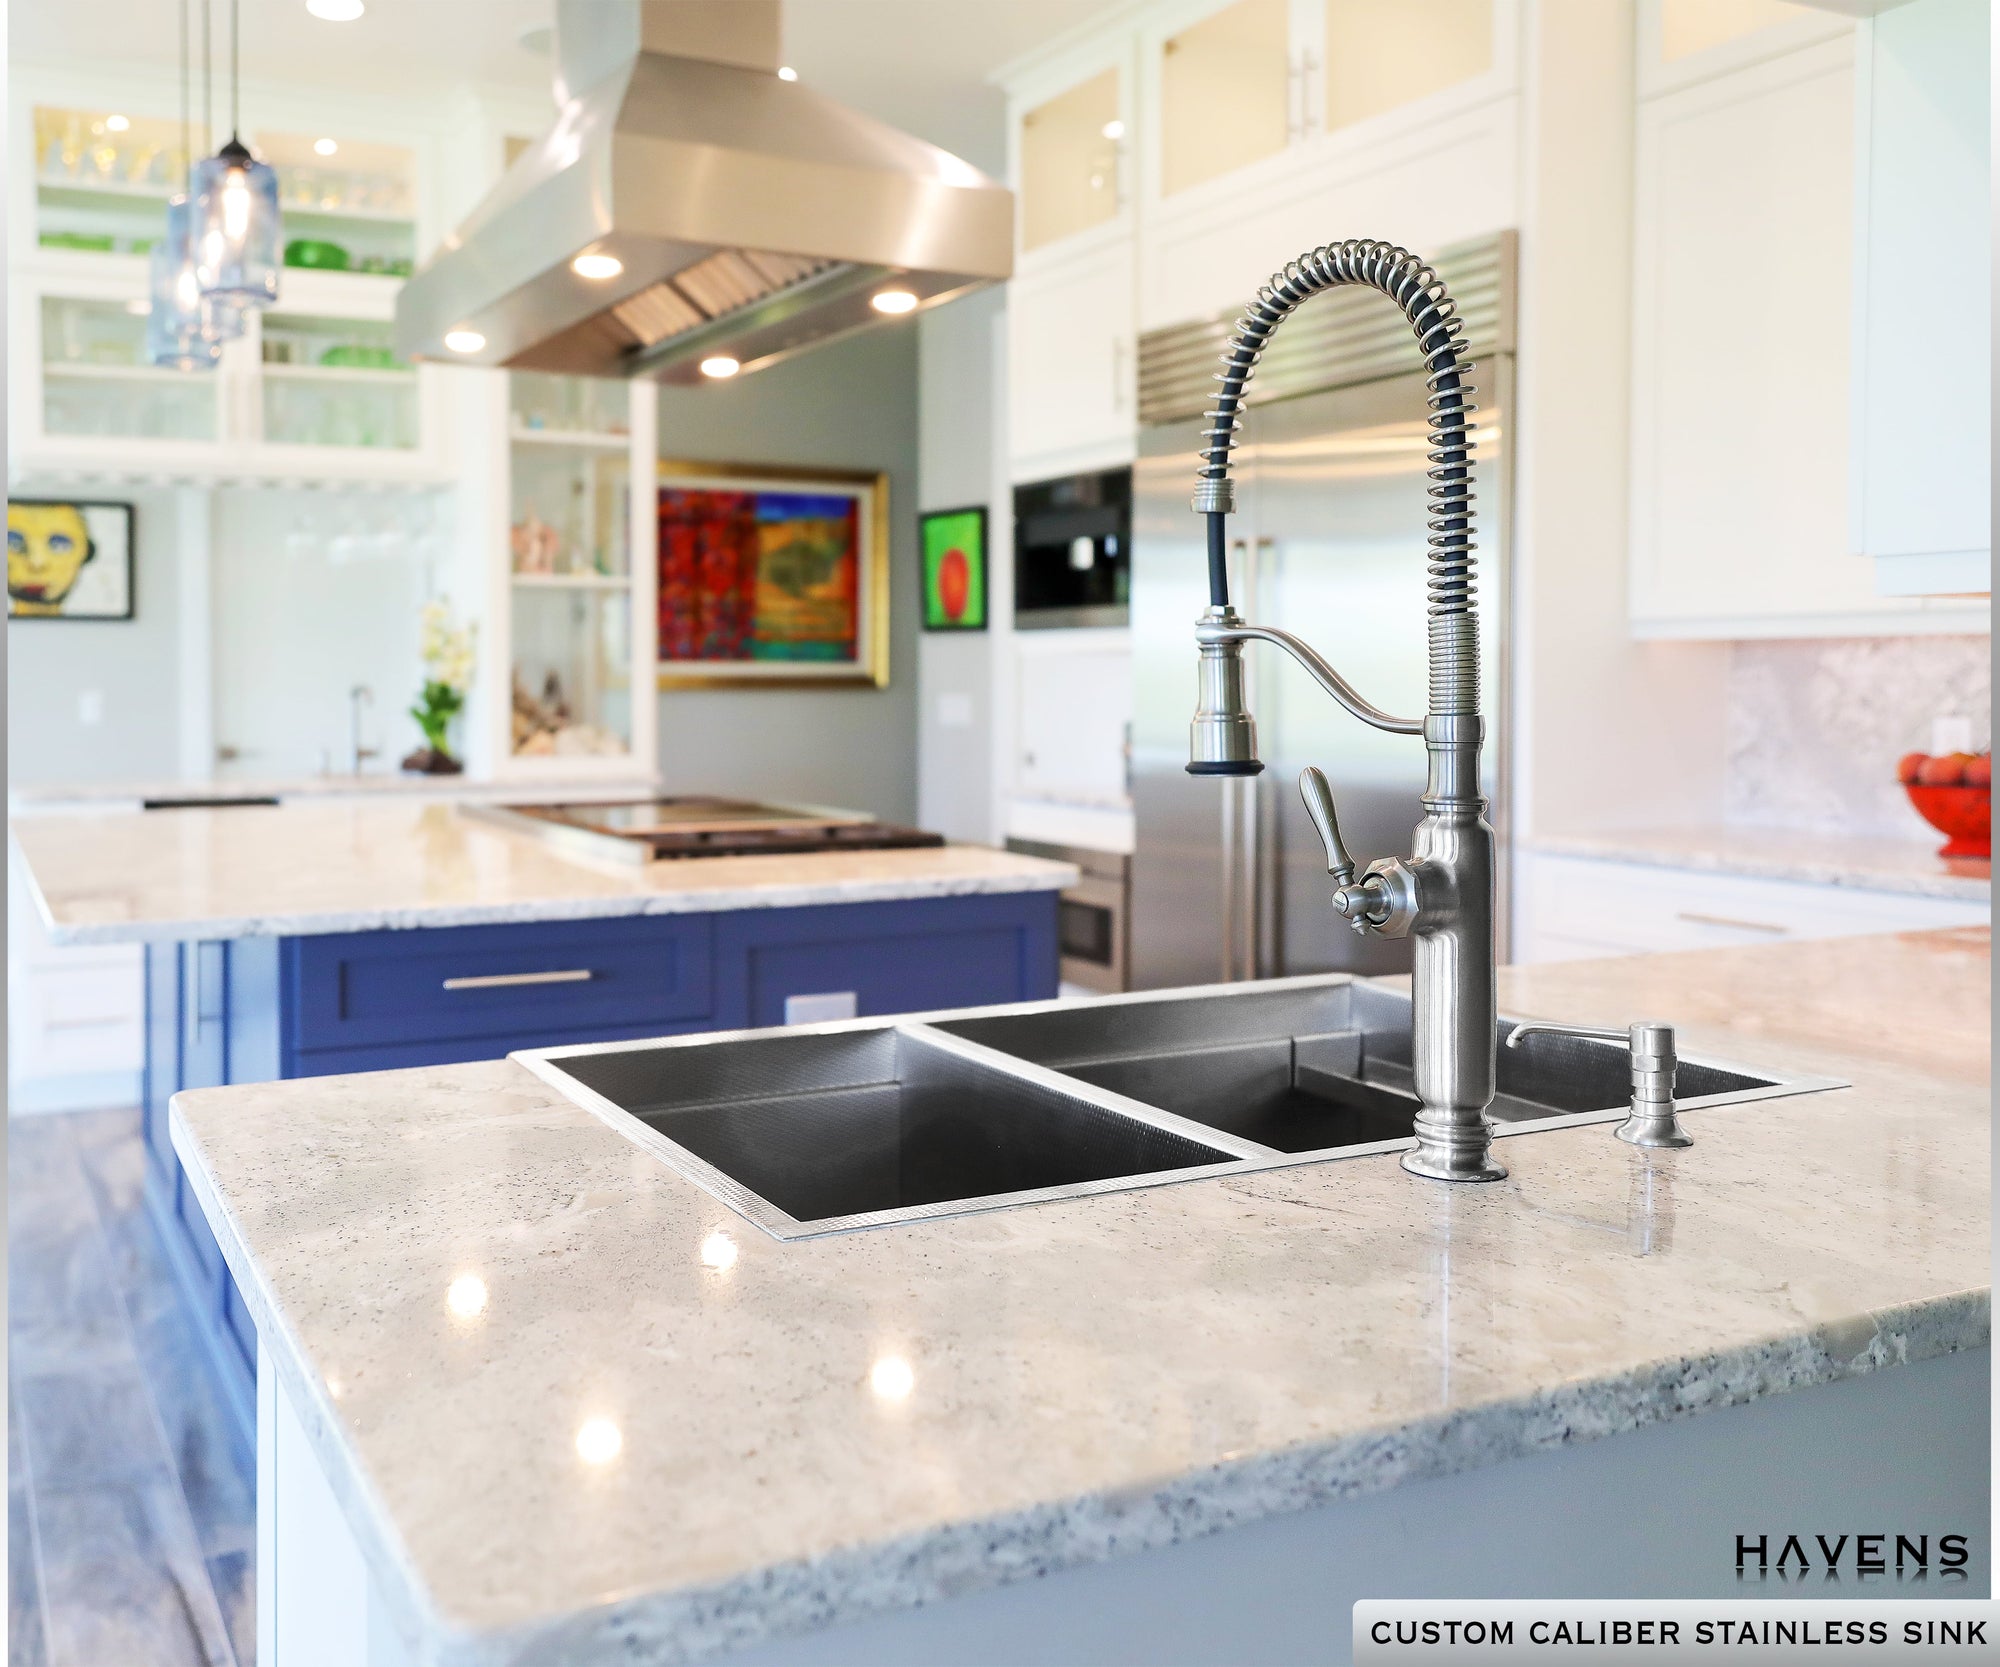 Double-Bowl Farmhouse Sink - Stainless Steel